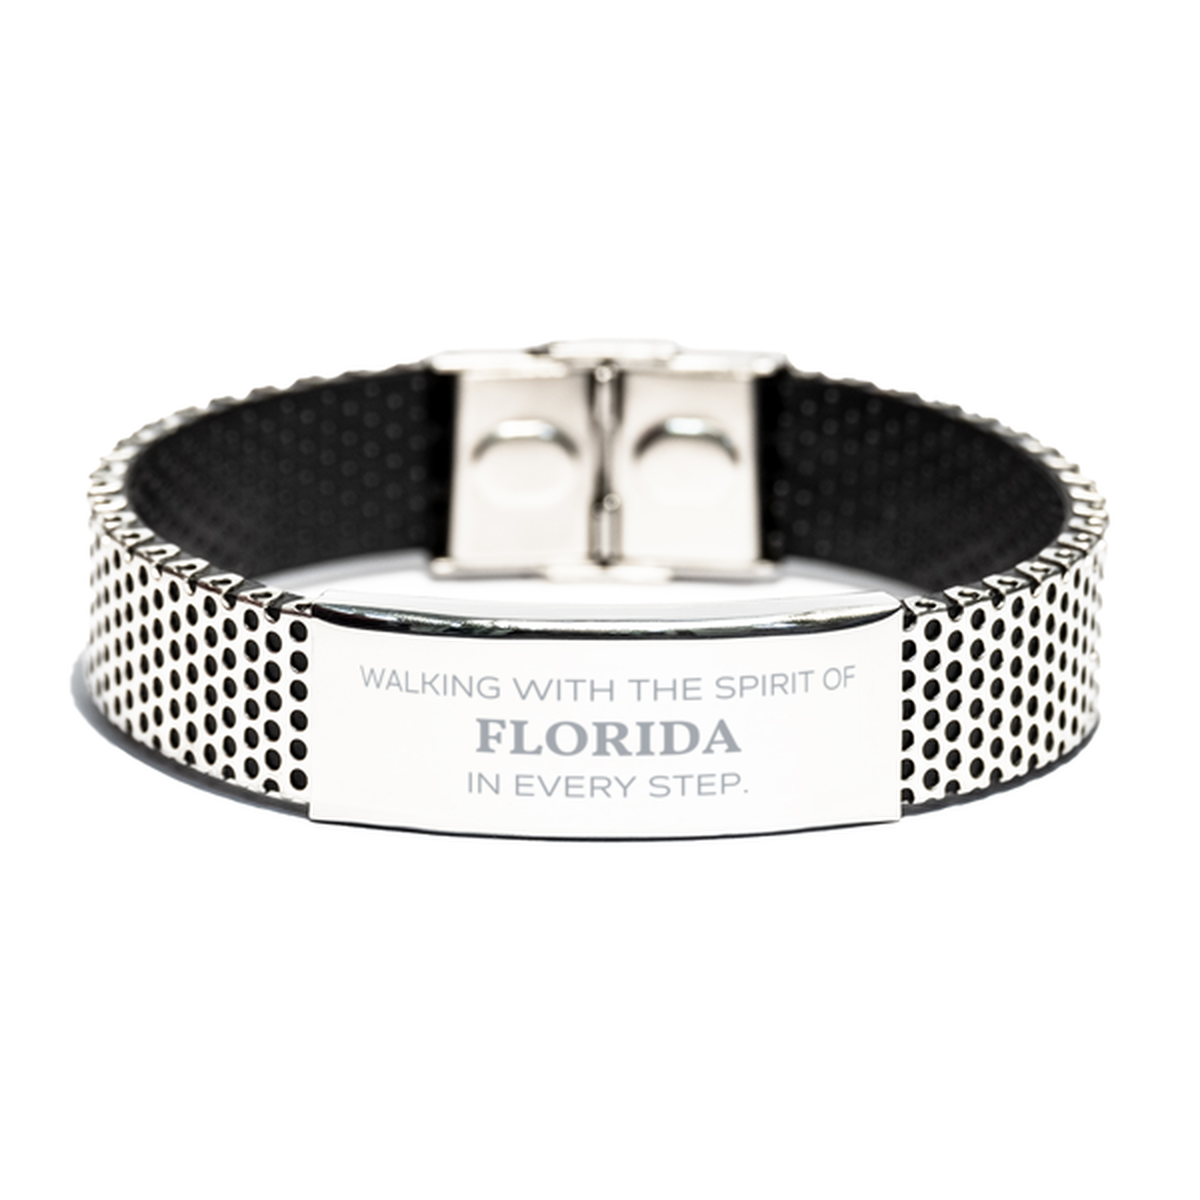 Florida Gifts, Walking with the spirit, Love Florida Birthday Christmas Stainless Steel Bracelet For Florida People, Men, Women, Friends